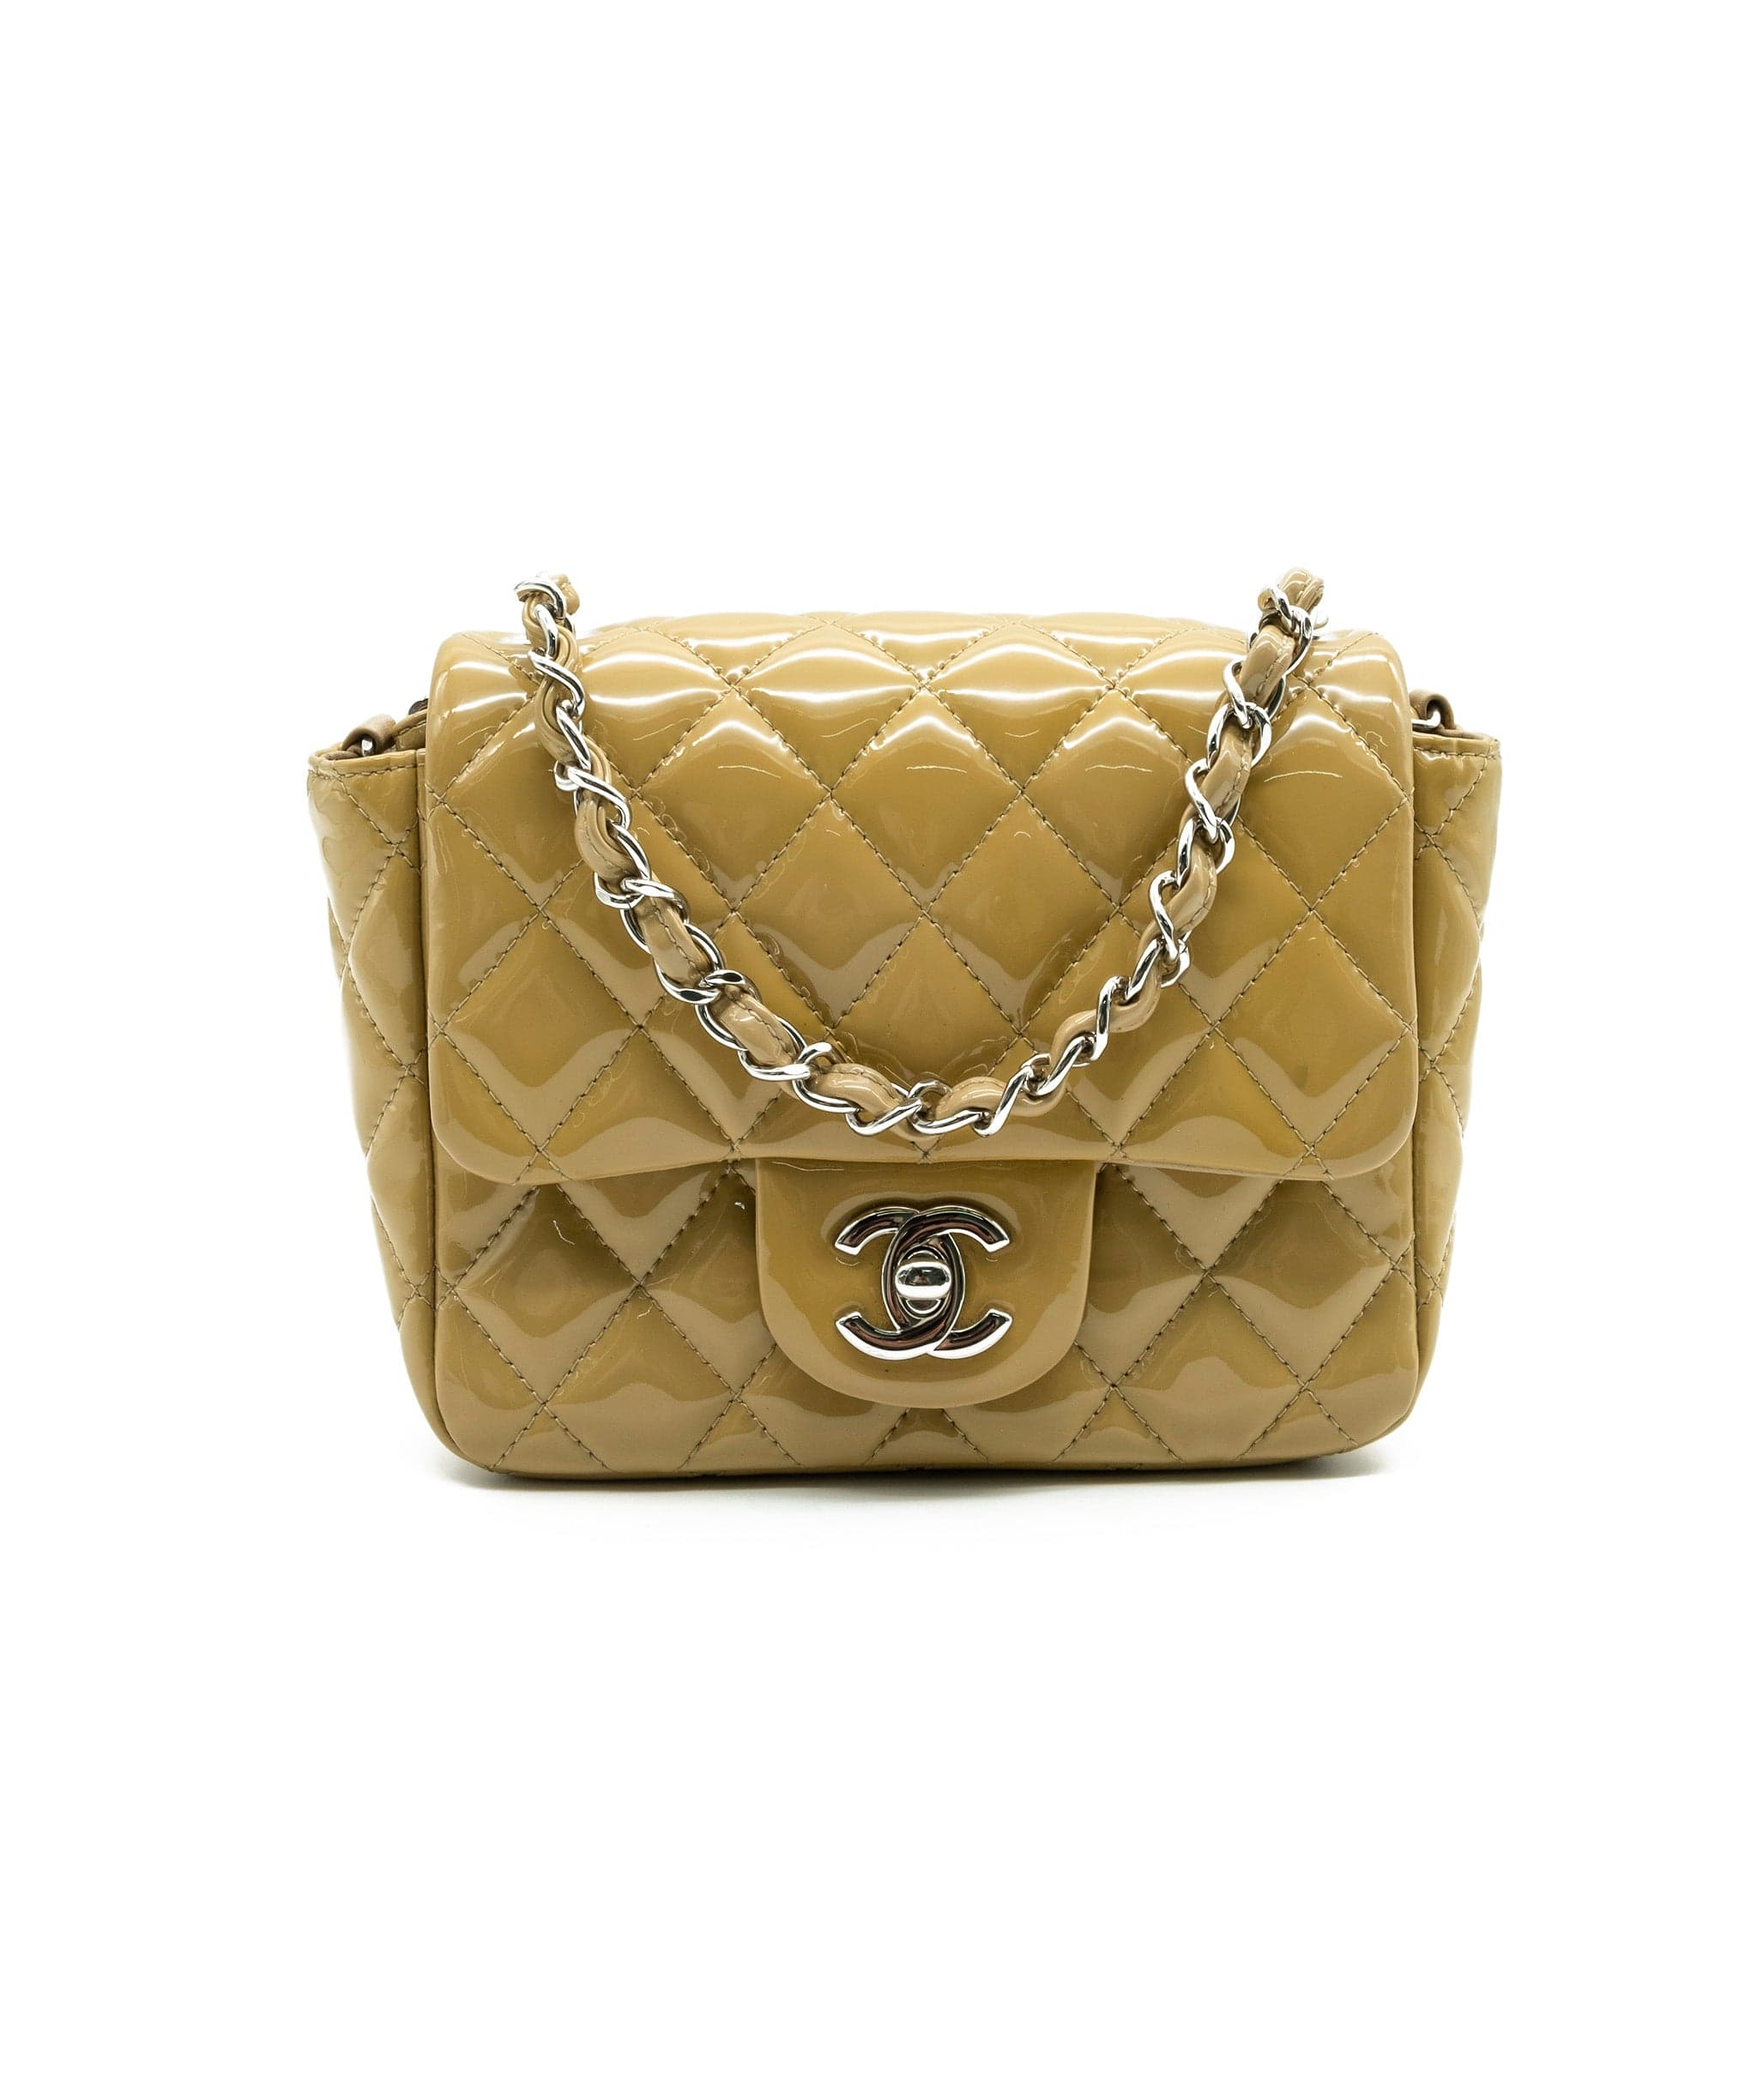 Chanel Chanel Mini Flap with Chain RJL1748